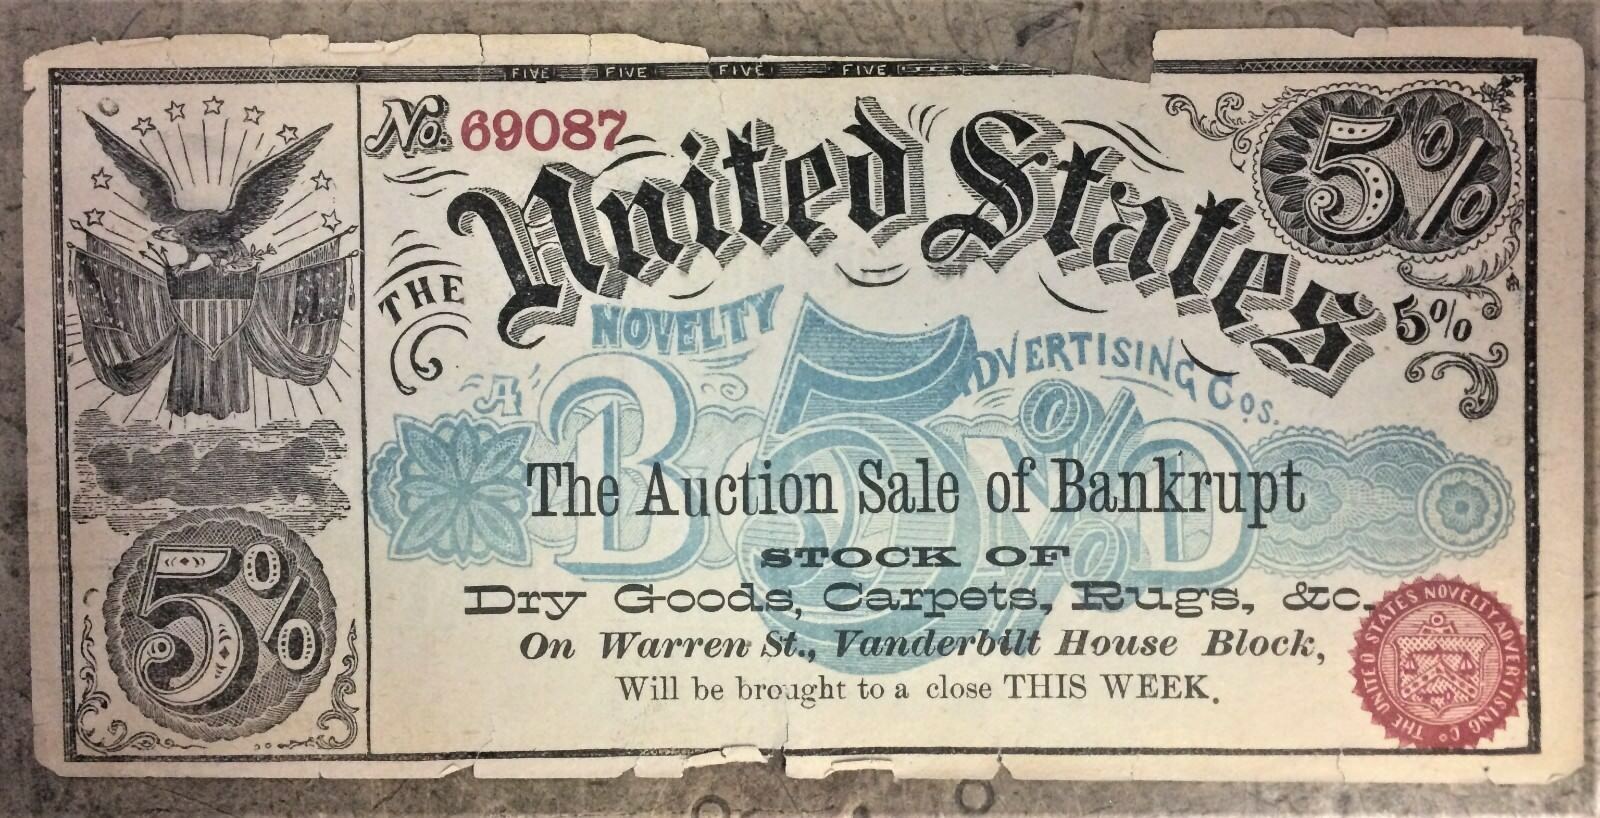 UNITED STATES NOVELTY ADVERTISING 5% NOTE AUCTION on WARREN ST (TRIBECA)  NYC